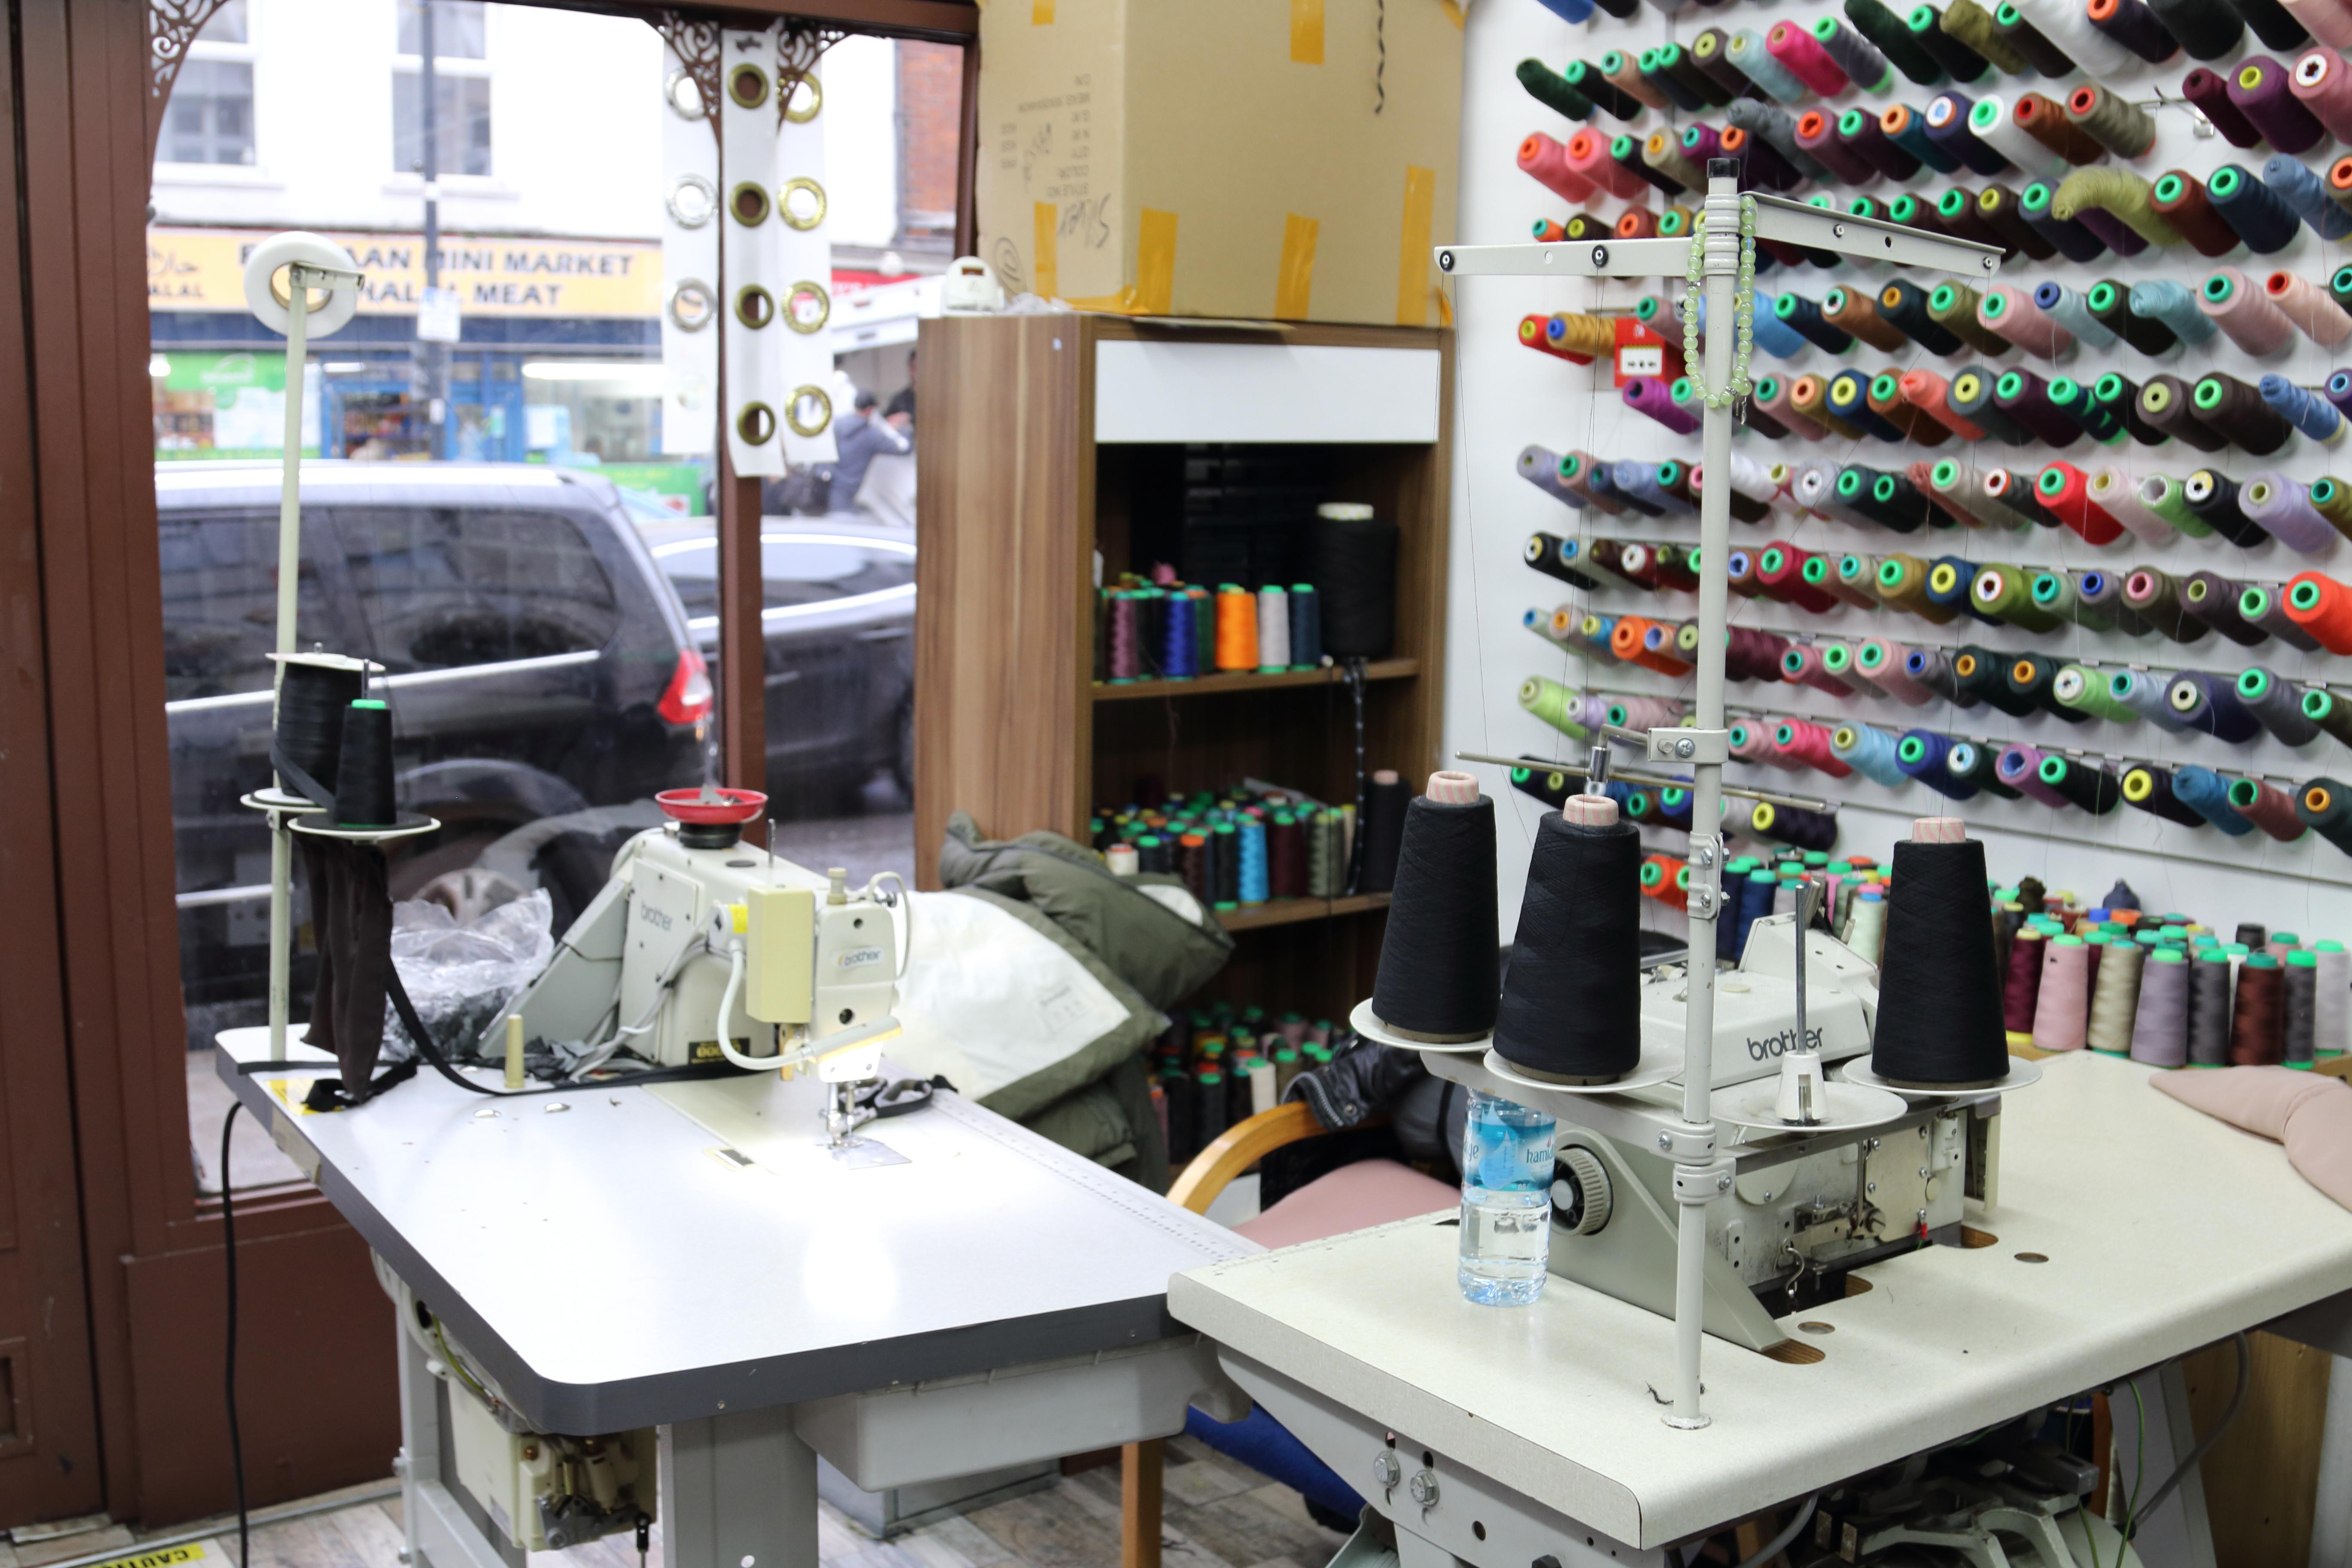 Photograph showing a corner of Ahmed Tailor’s shop where a tailor sits, with a work station including two different sewing machines. Behind the work station on the wall are spools of thread in different colours, in easy reach for use during day-to-day work.